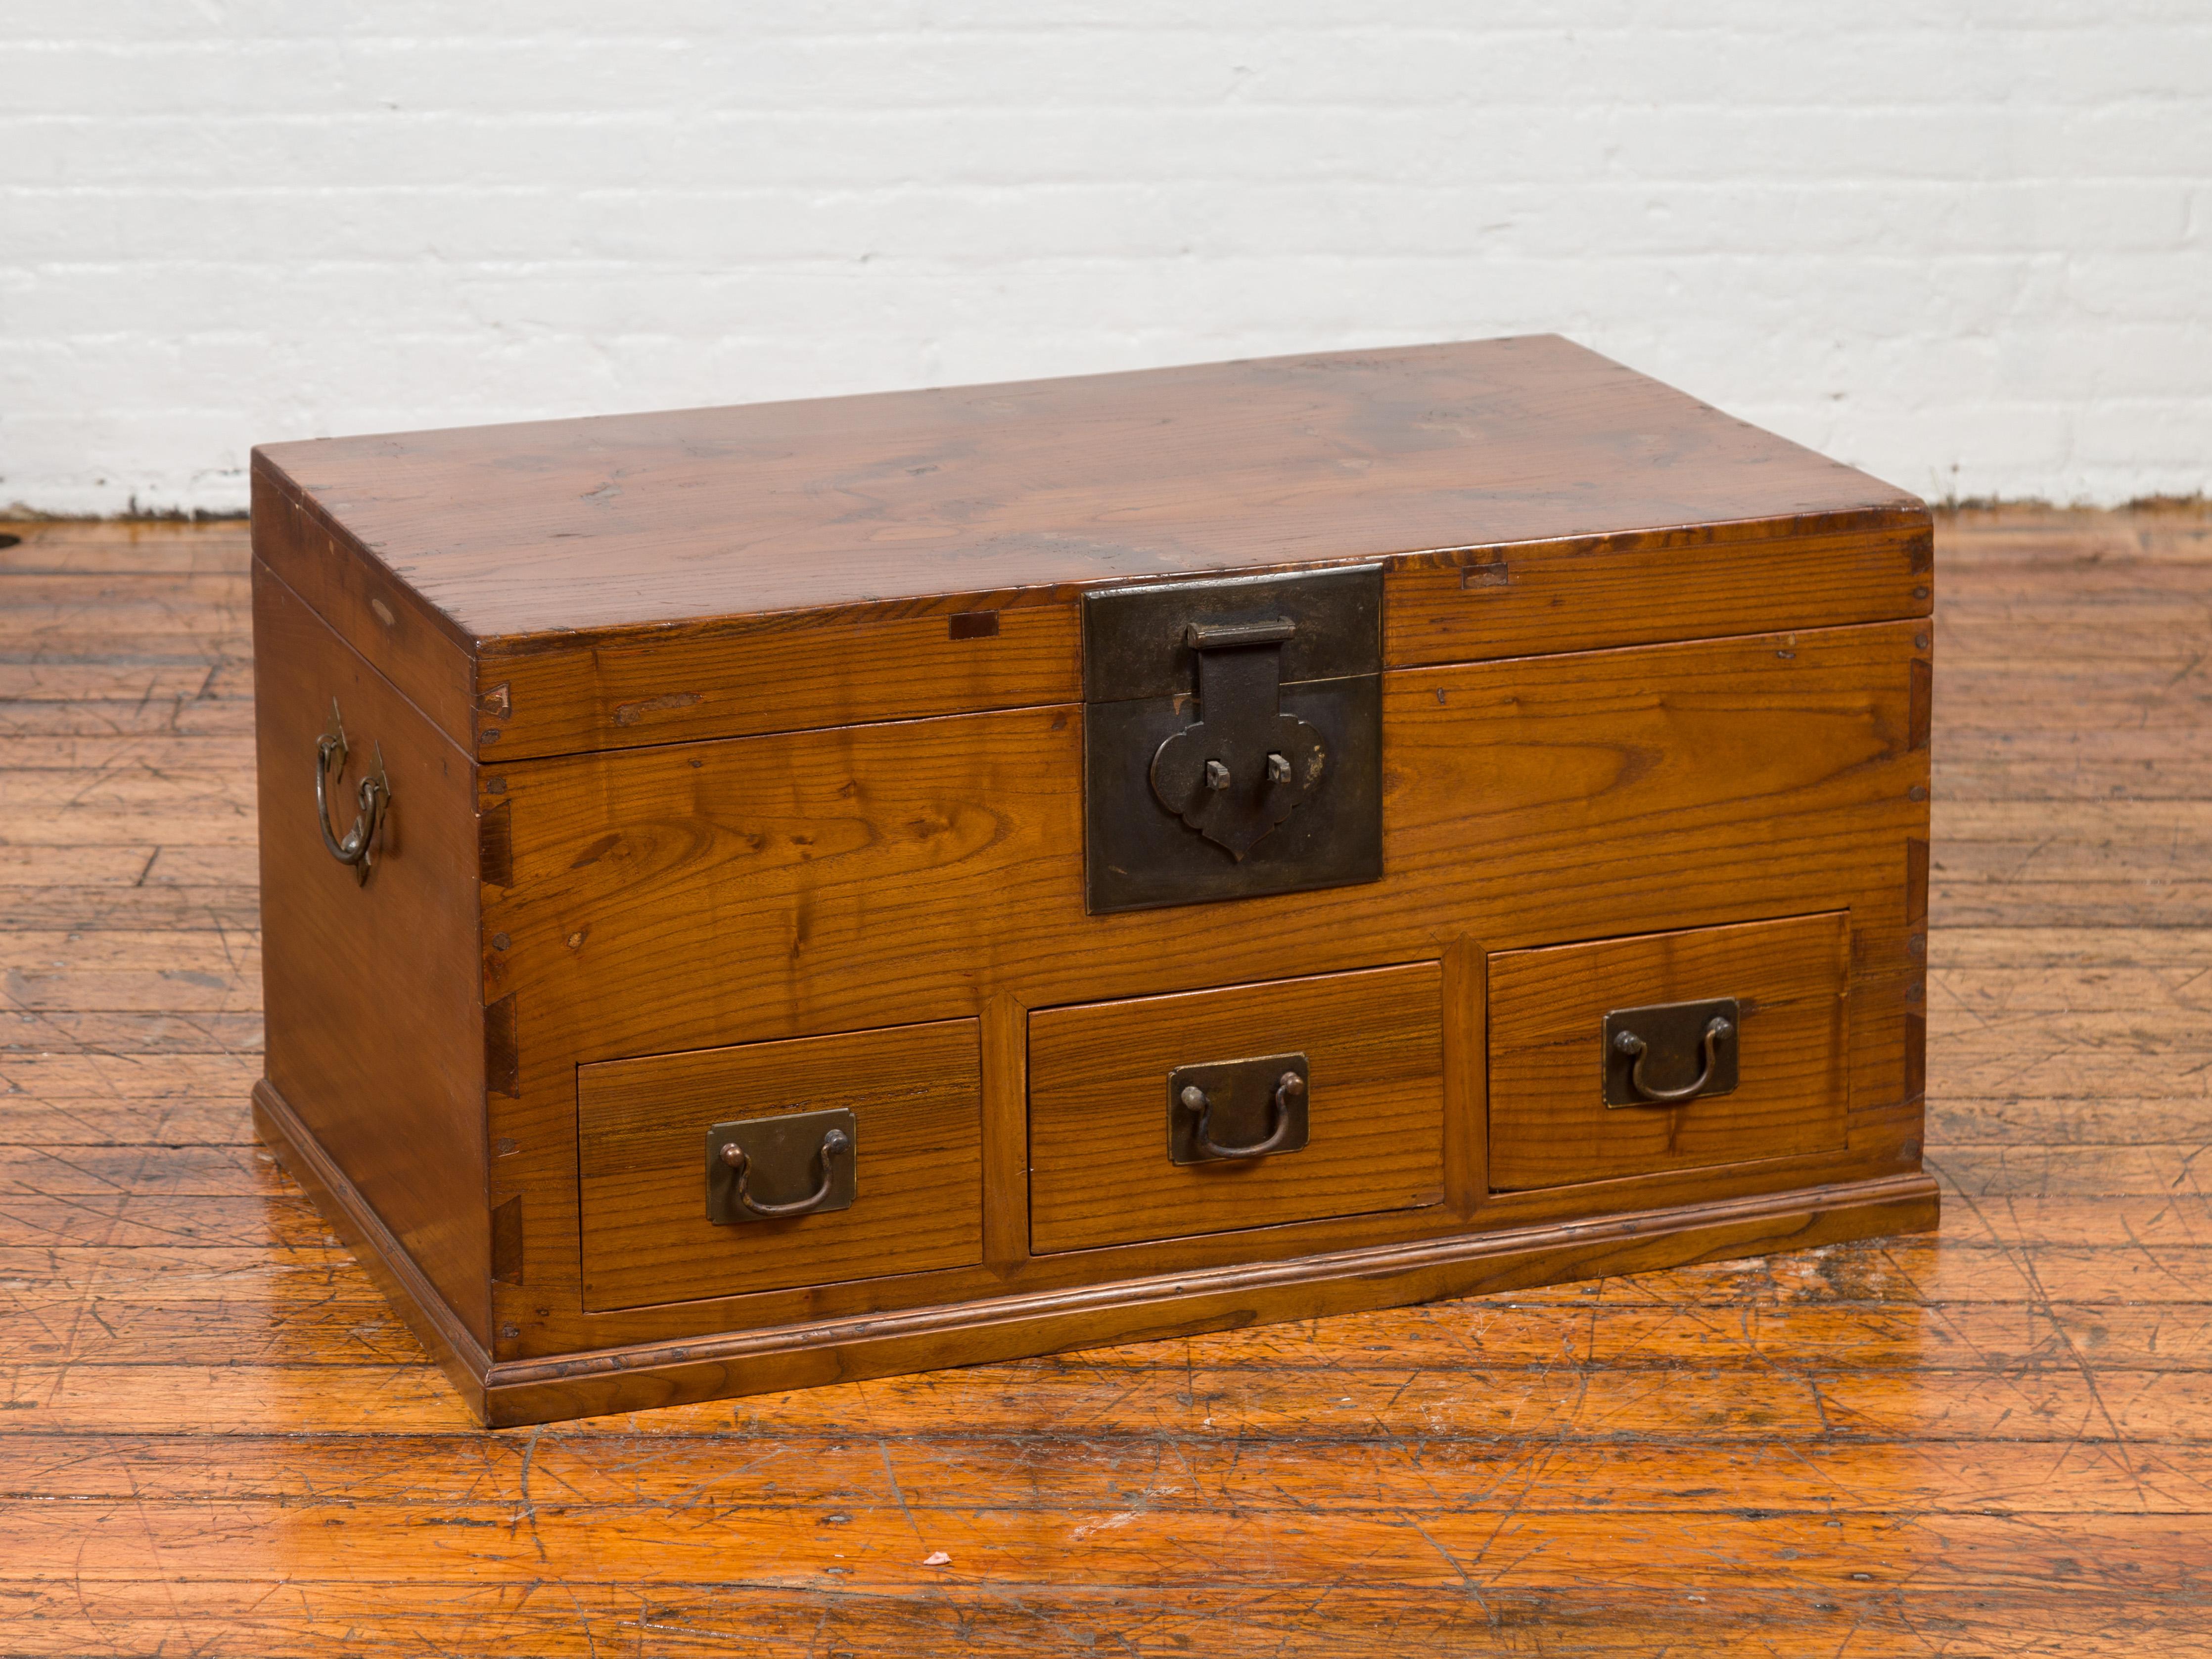 A Chinese Qing Dynasty antique blanket chest from the 19th century, with three drawers, dovetailed construction and distressed patina. Crafted in China during the 19th century, this blanket chest features a rectangular lid that opens thanks to a